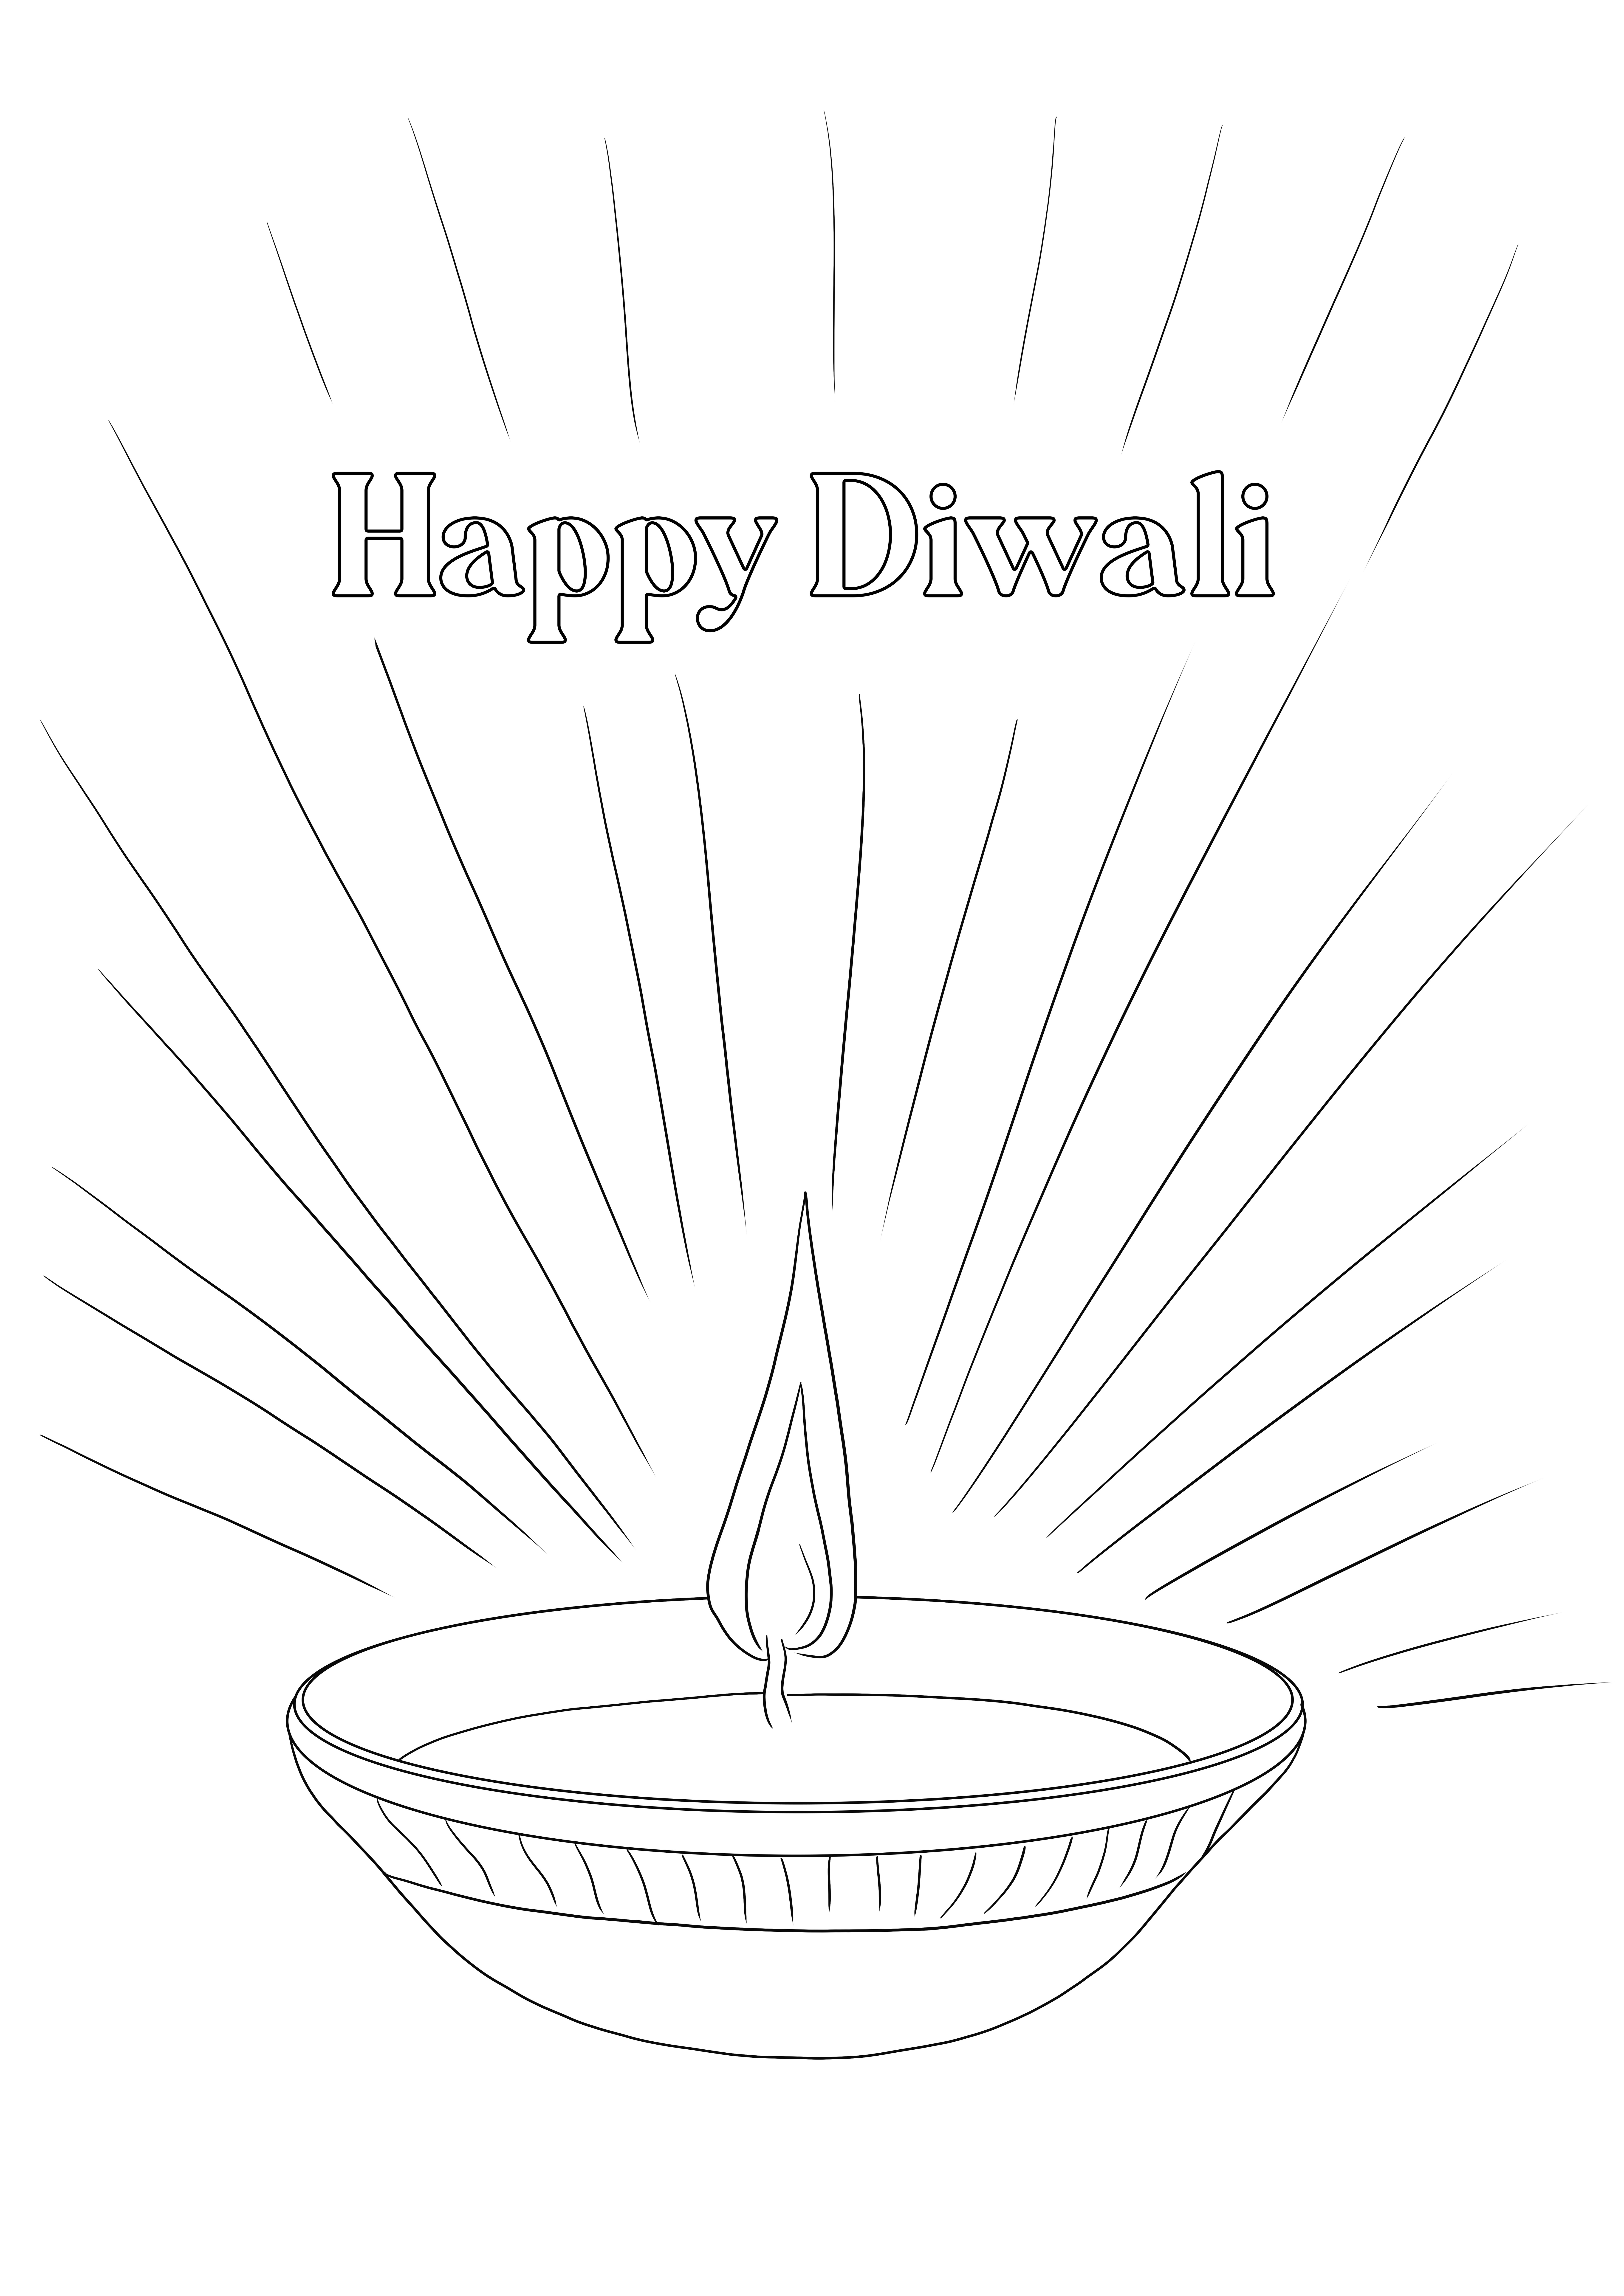 Diwali Diya simple coloring and free printing for kids of all ages